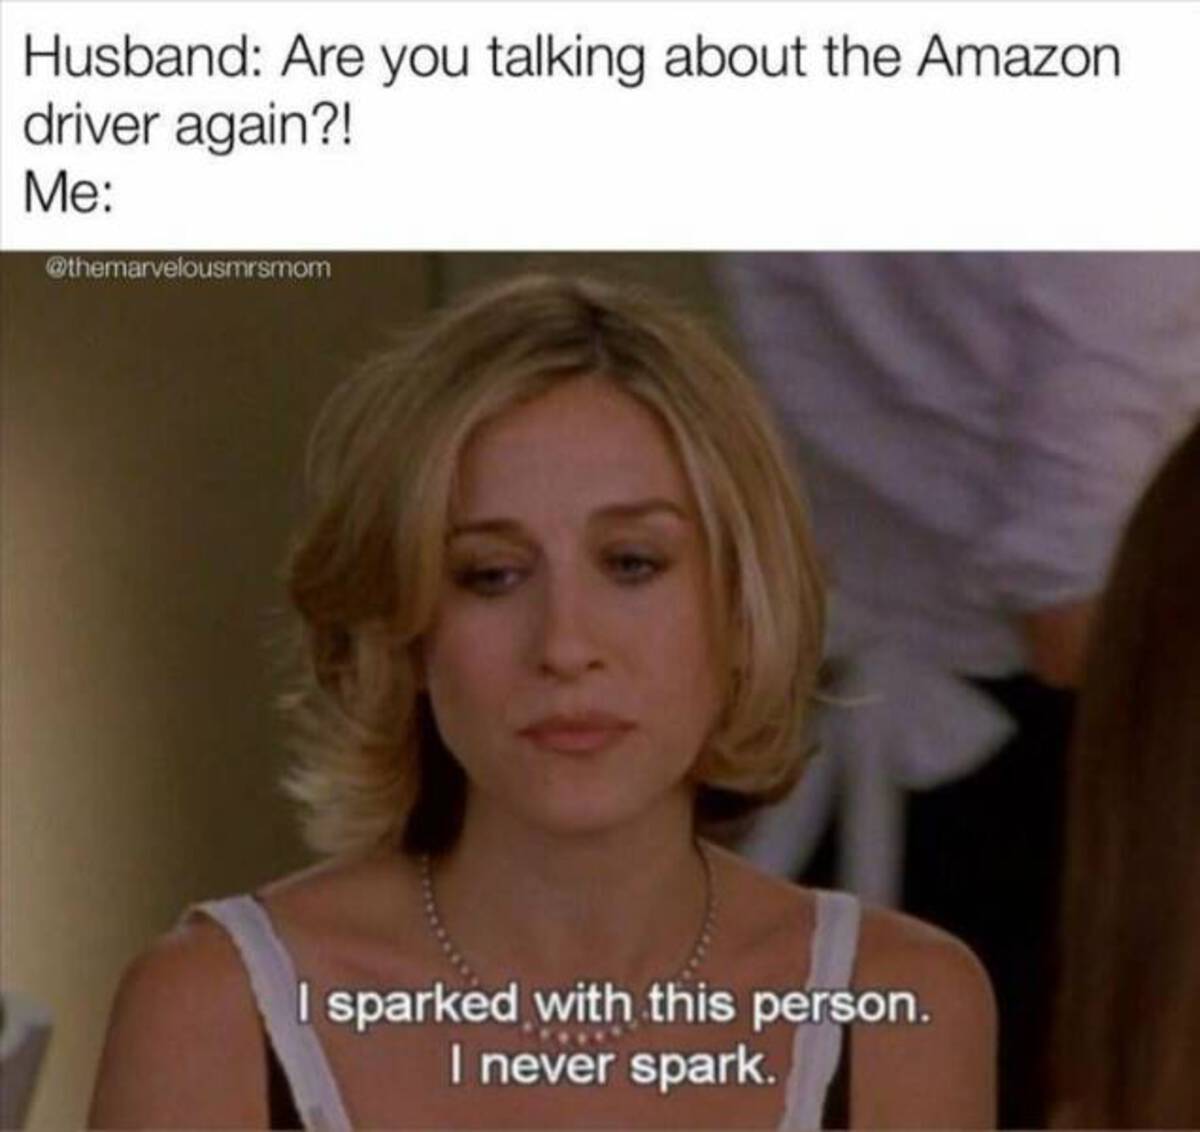 blond - Husband Are you talking about the Amazon driver again?! Me I sparked with this person. I never spark.